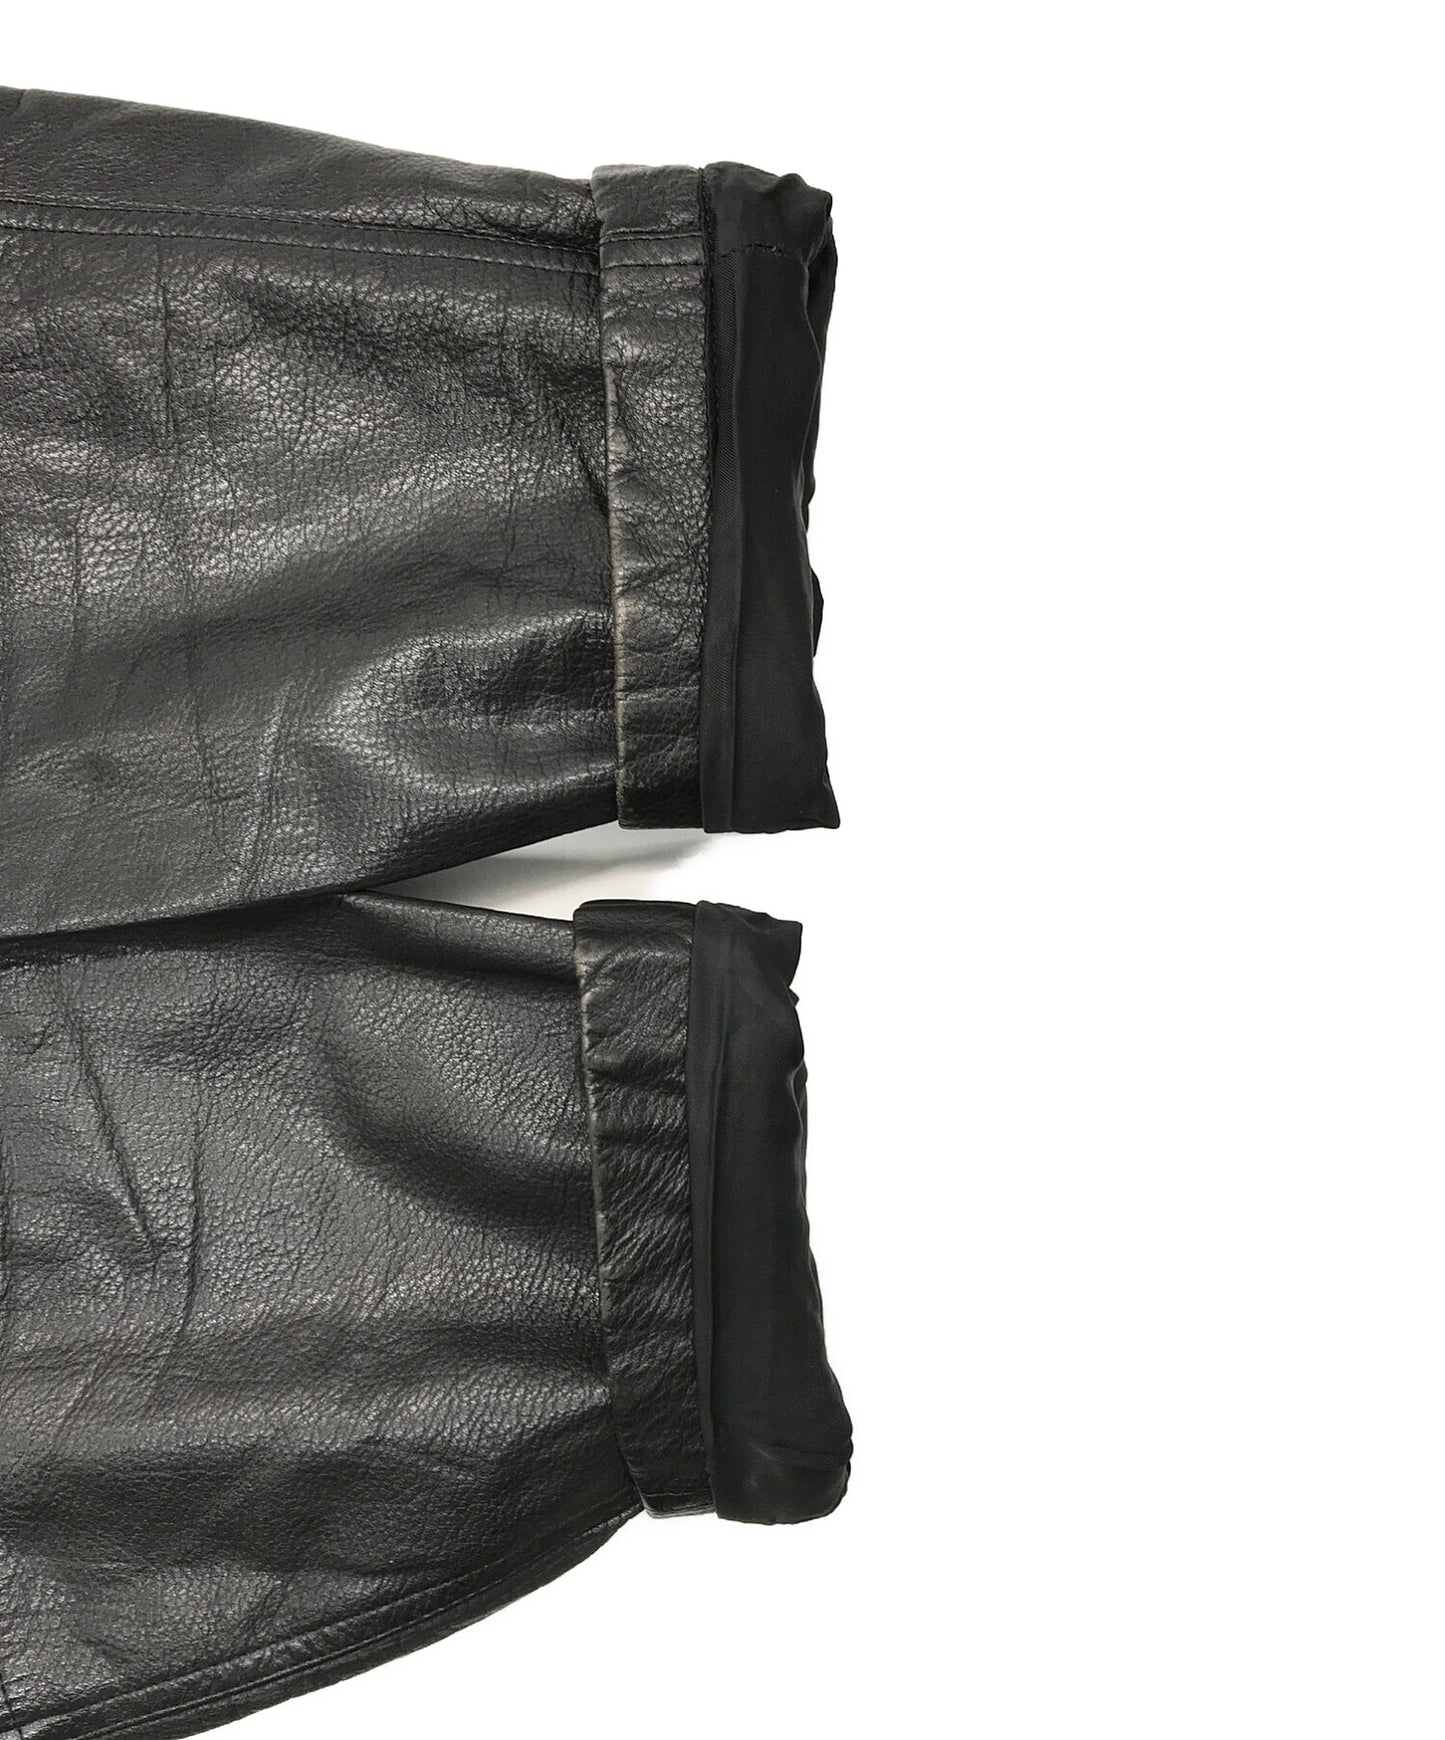 [Pre-owned] ISSEY MIYAKE MEN Archival Leather Pants LQ43037